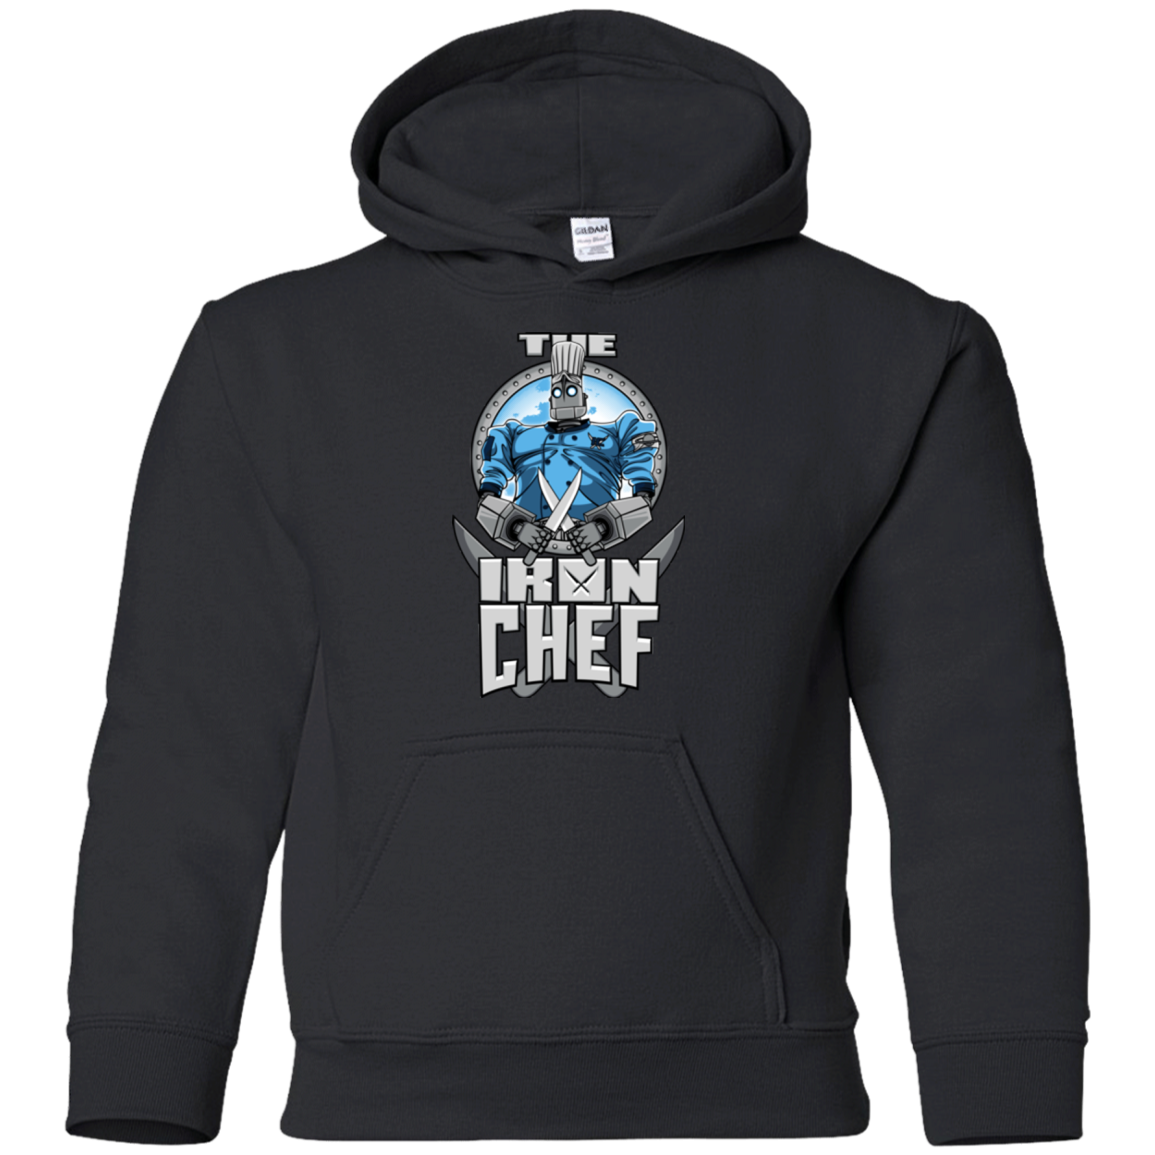 Iron Giant Chef Youth Hoodie